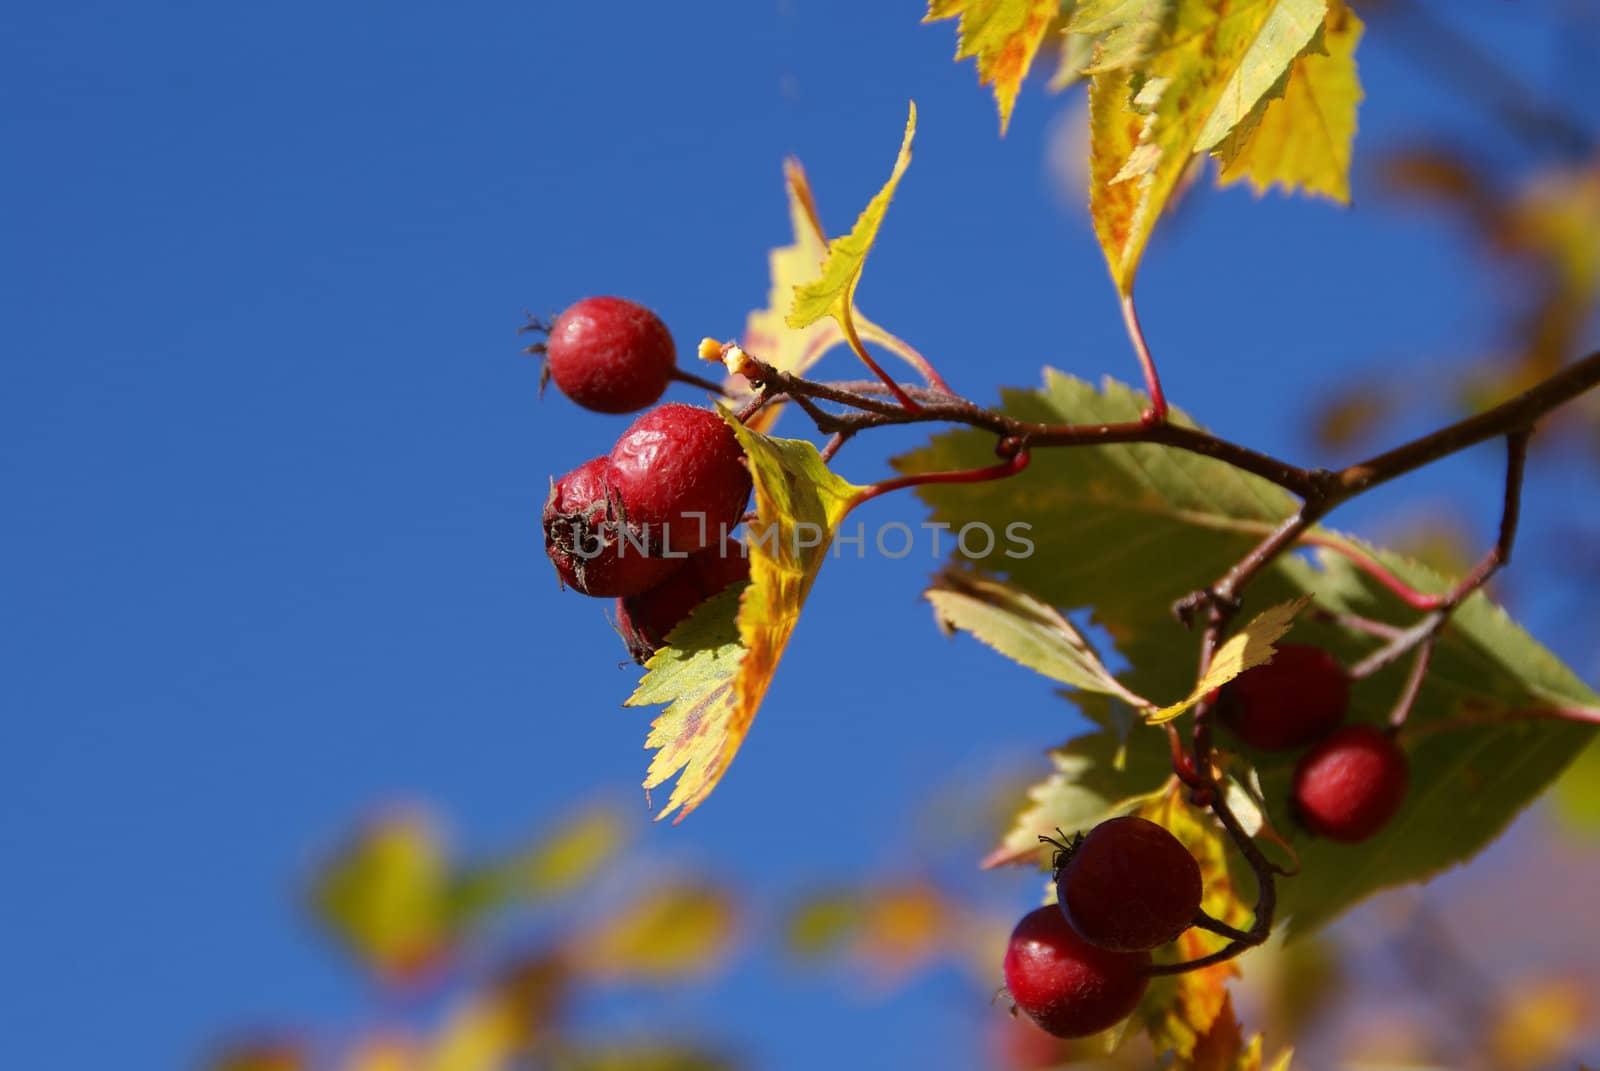 A closeup of red berries (likely Sorbus intermedia) with colorful autumn leaves and blue sky background. Photographed in Finland, October 2010.